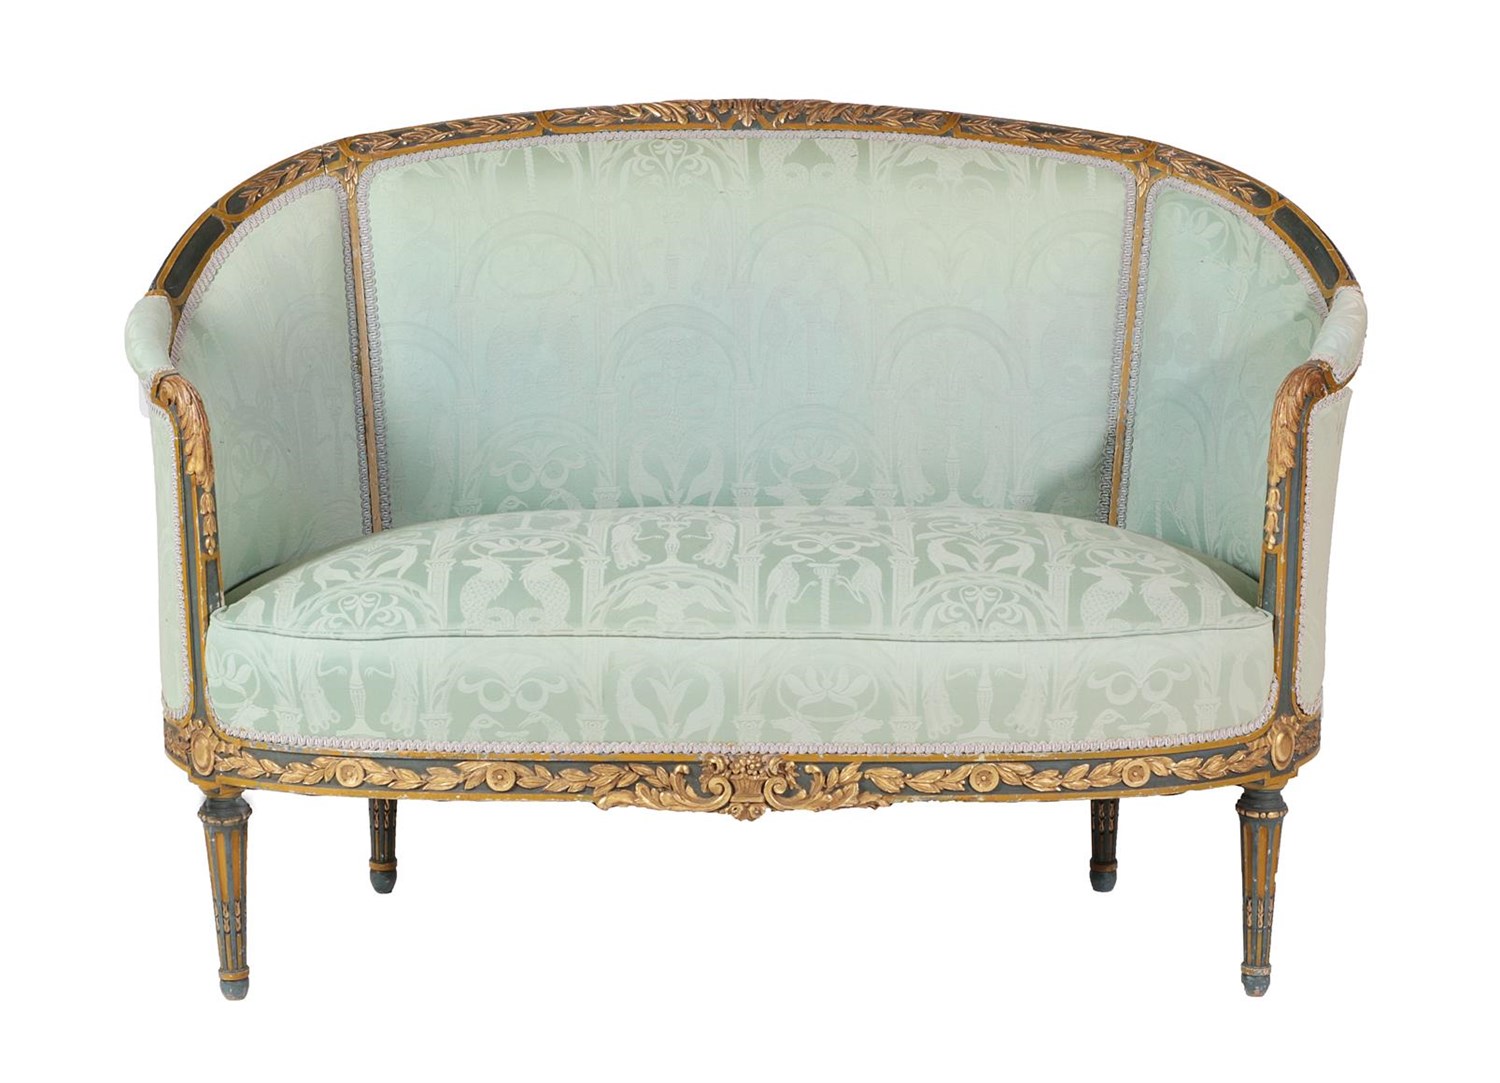 Lot 680 - A Late 19th Century Carved Giltwood and Green Painted Two-Seater Sofa, recovered in classical green